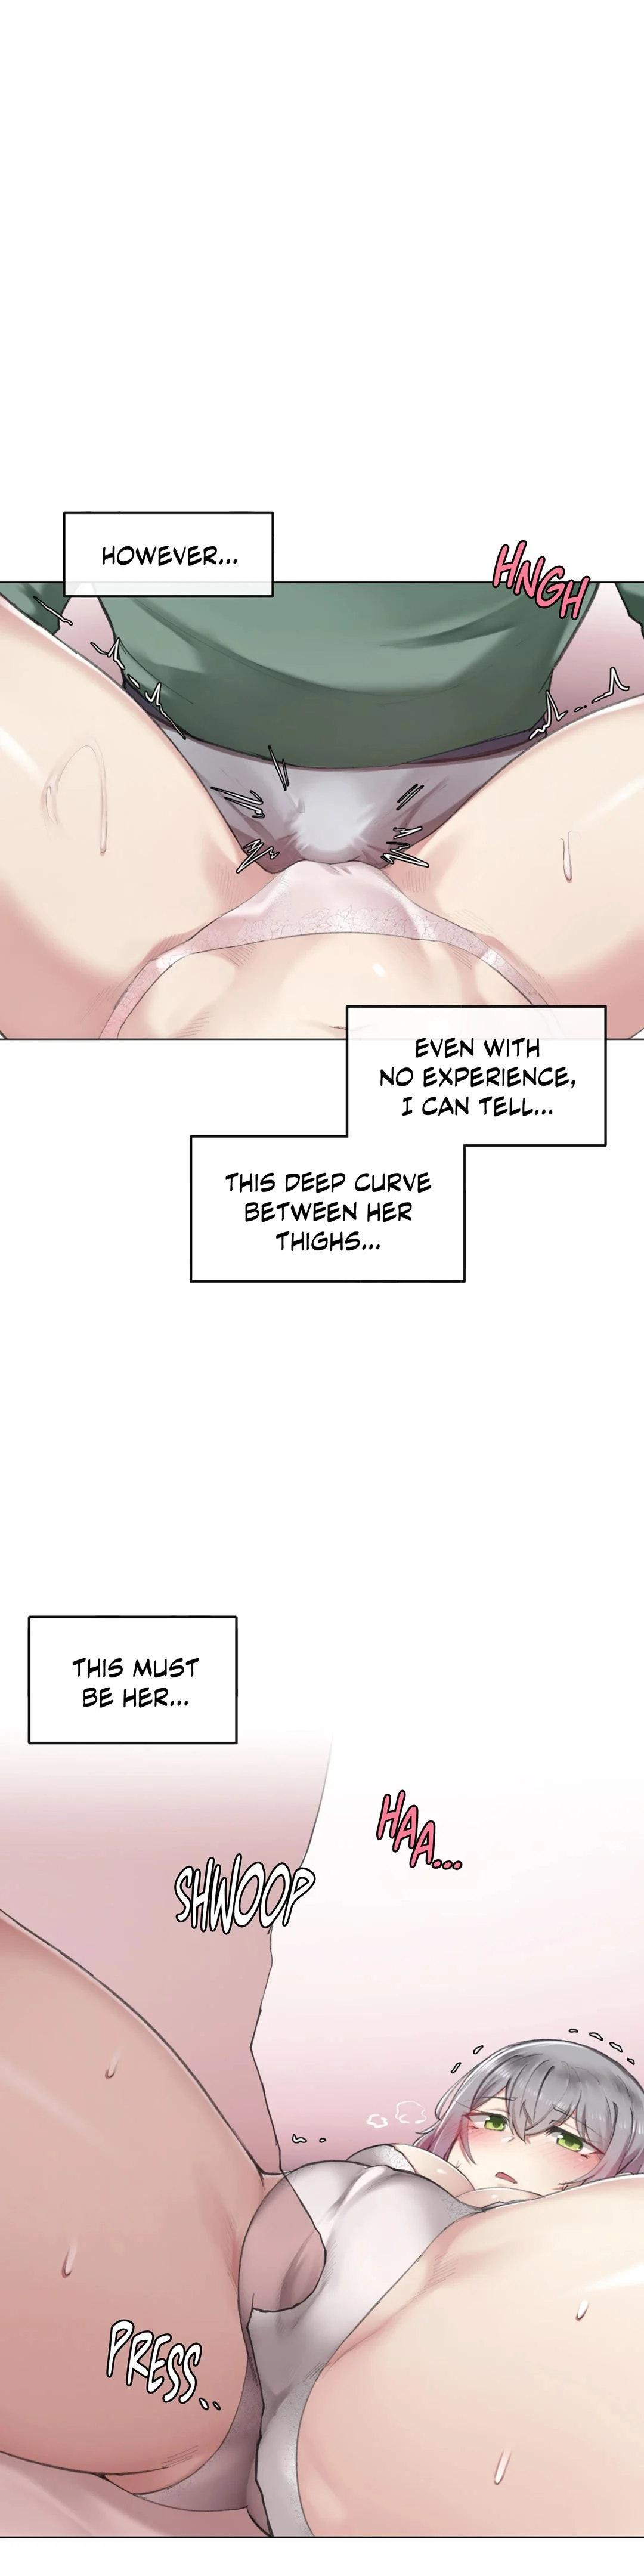 [Dumangoon, KONG_] Sexcape Room: Snap Off Ch.7/7 [English] [Manhwa PDF] Completed 47